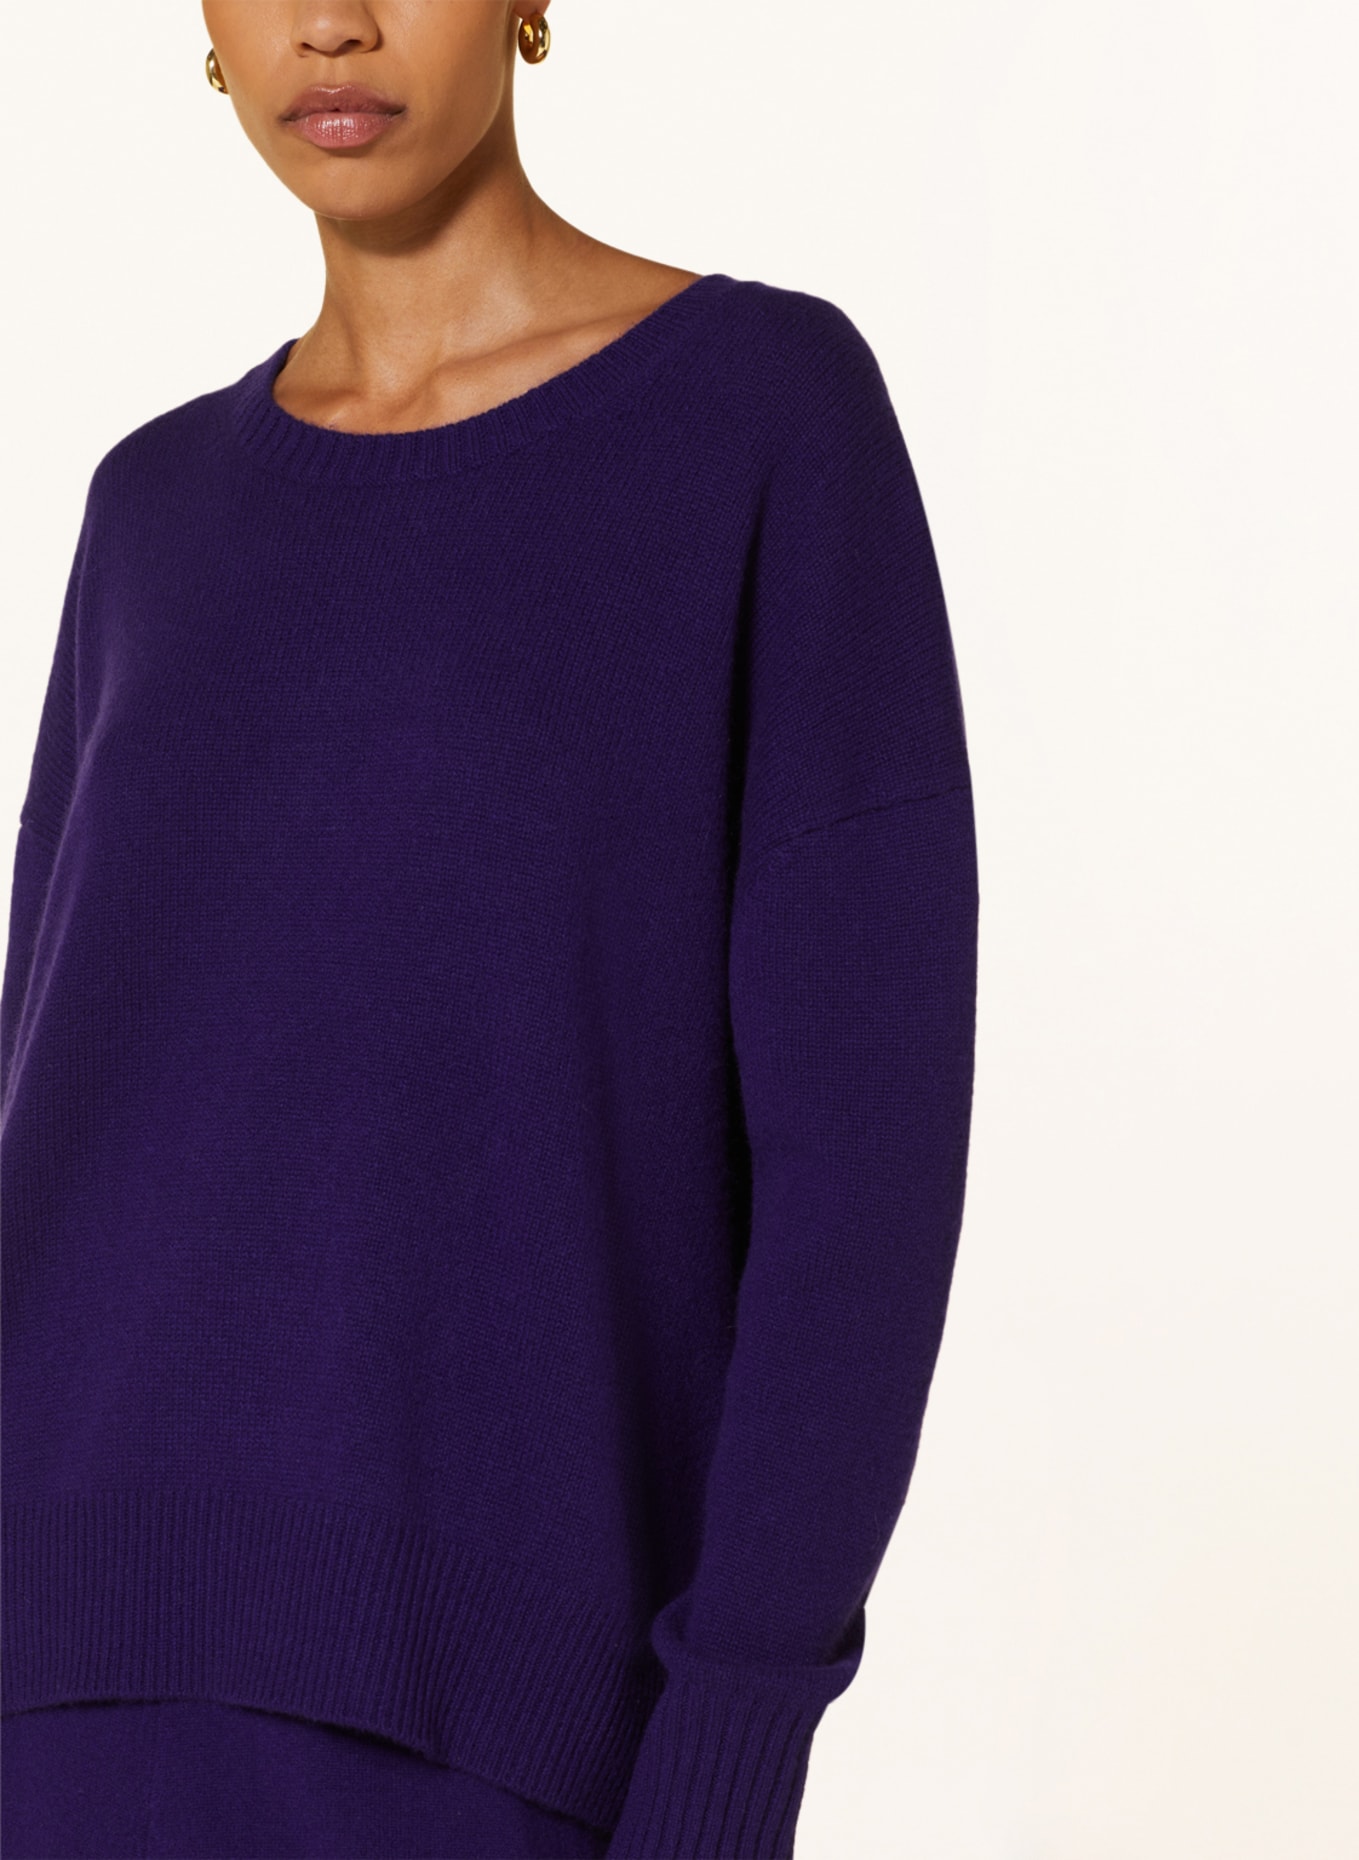 (THE MERCER) N.Y. Cashmere sweater, Color: PURPLE (Image 4)